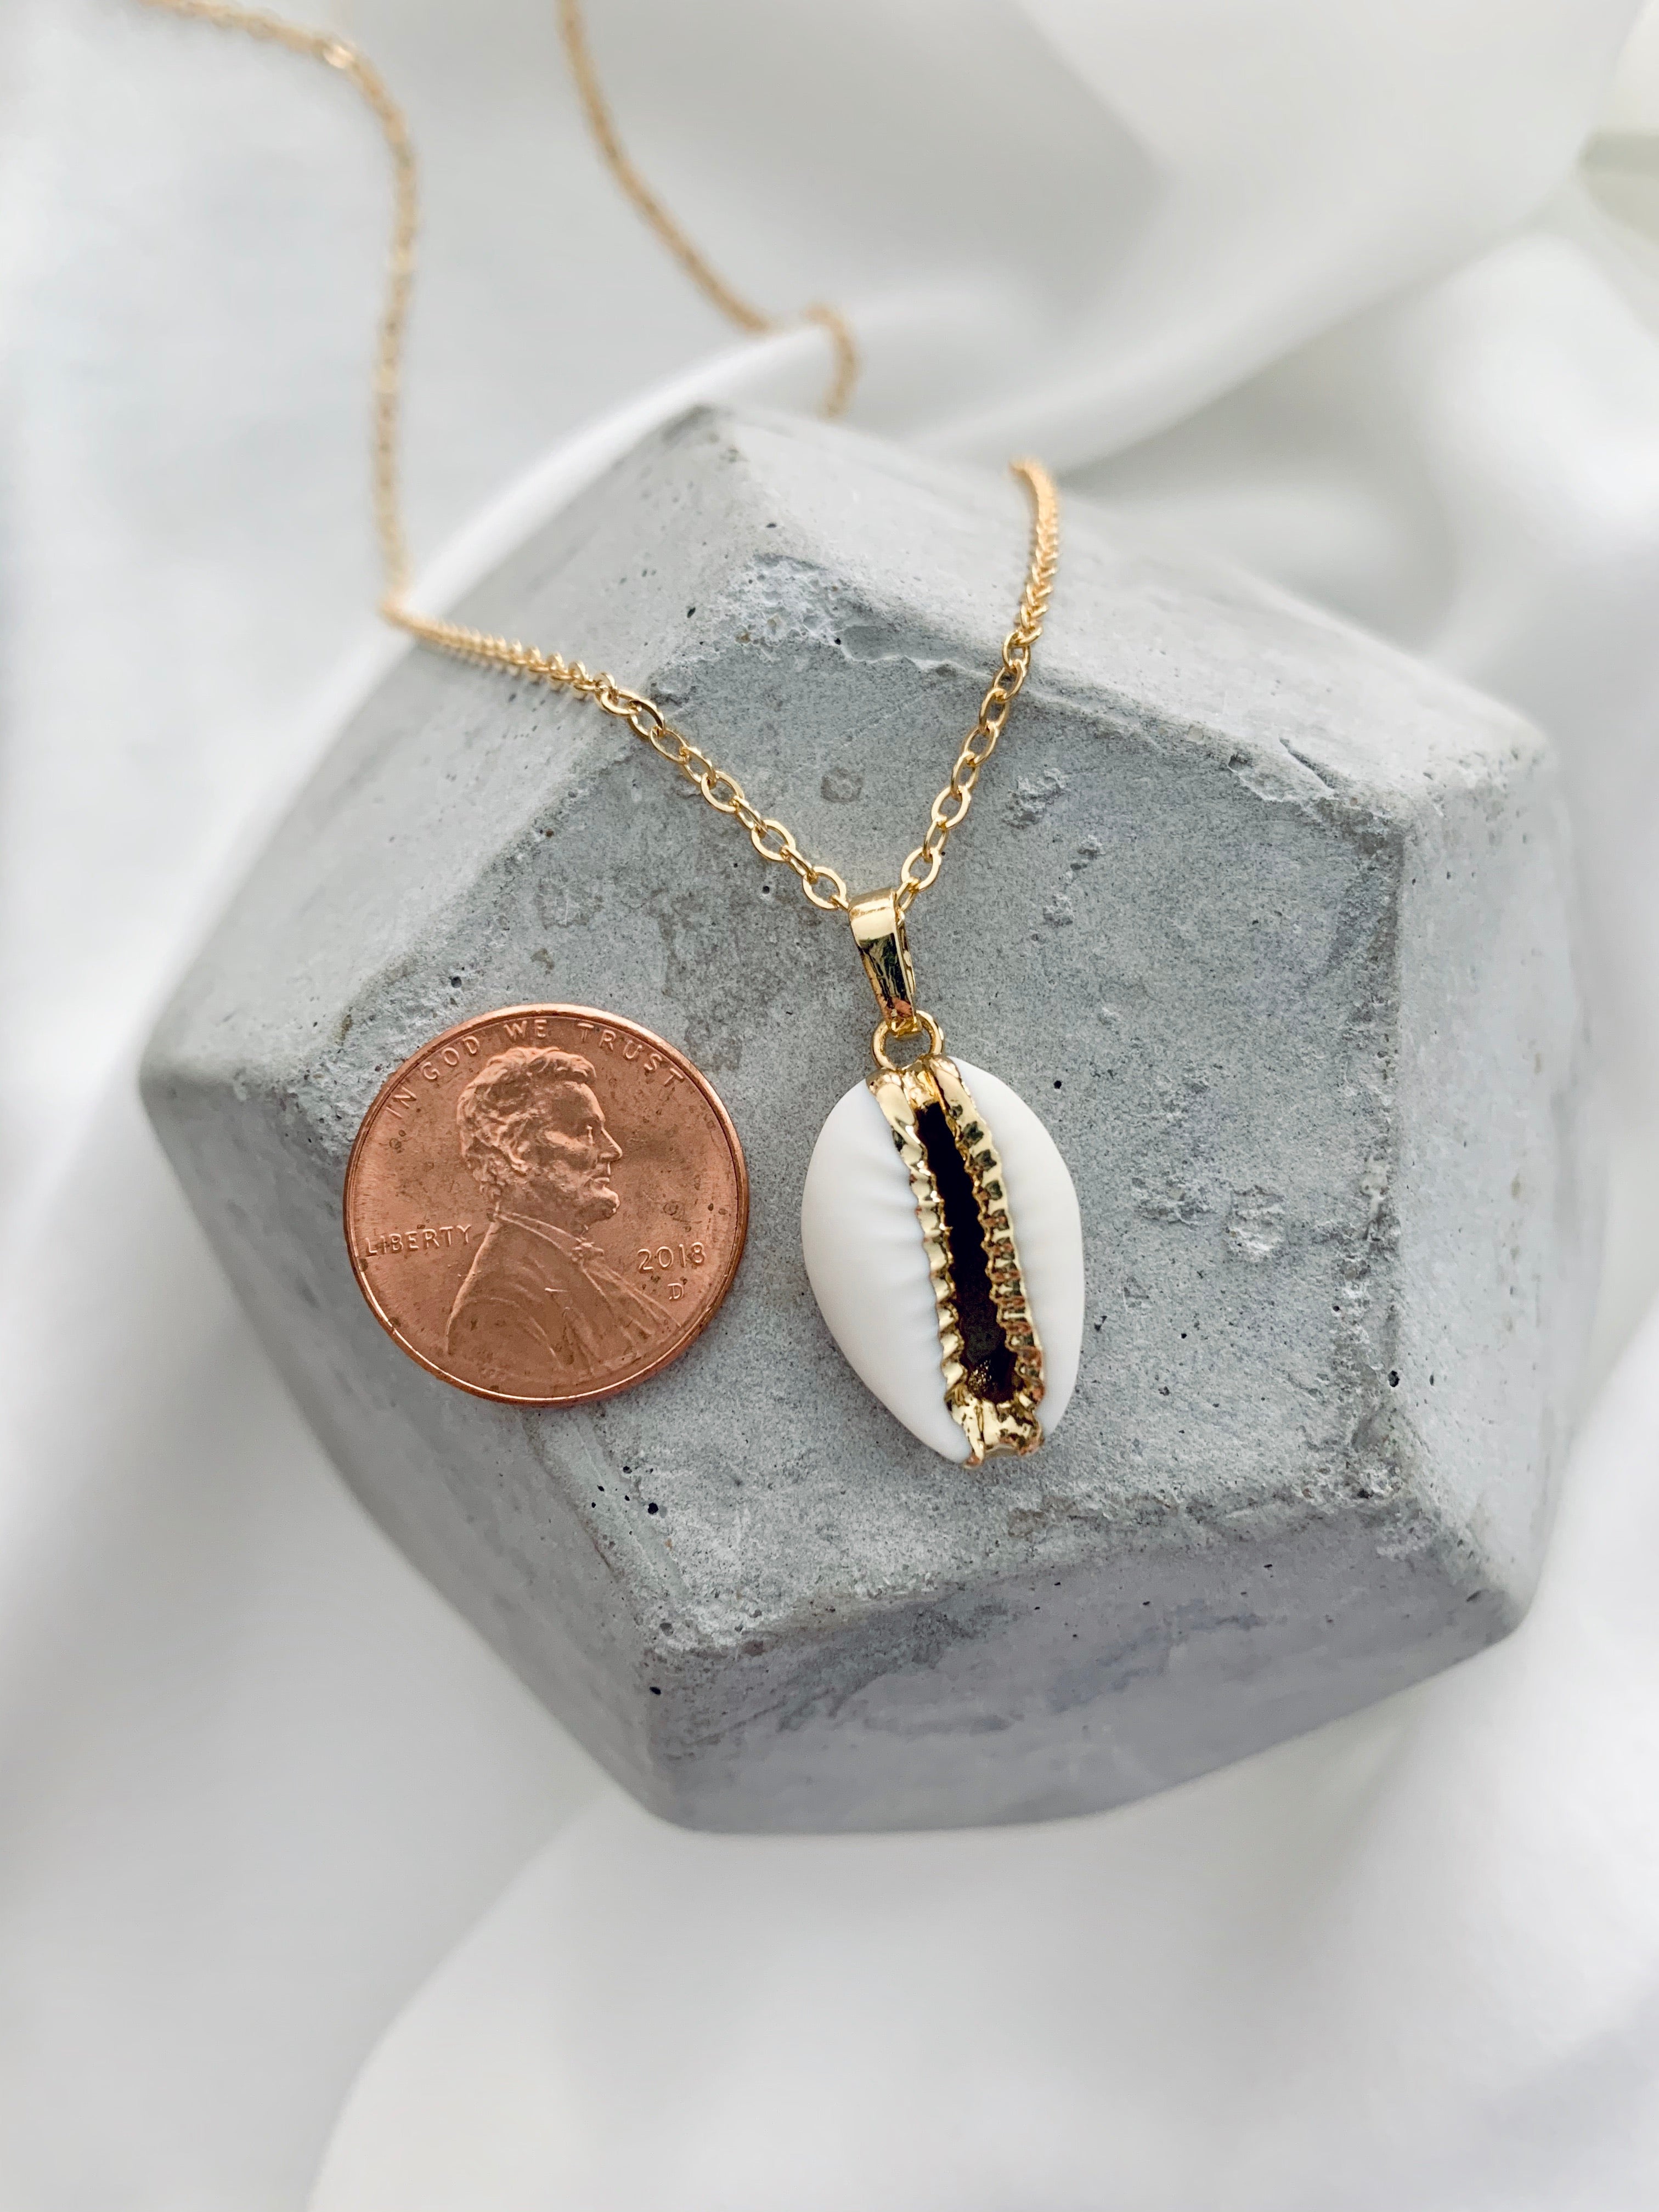 Genuine White Cowrie Shell Pendant Necklace - Gold Dipped